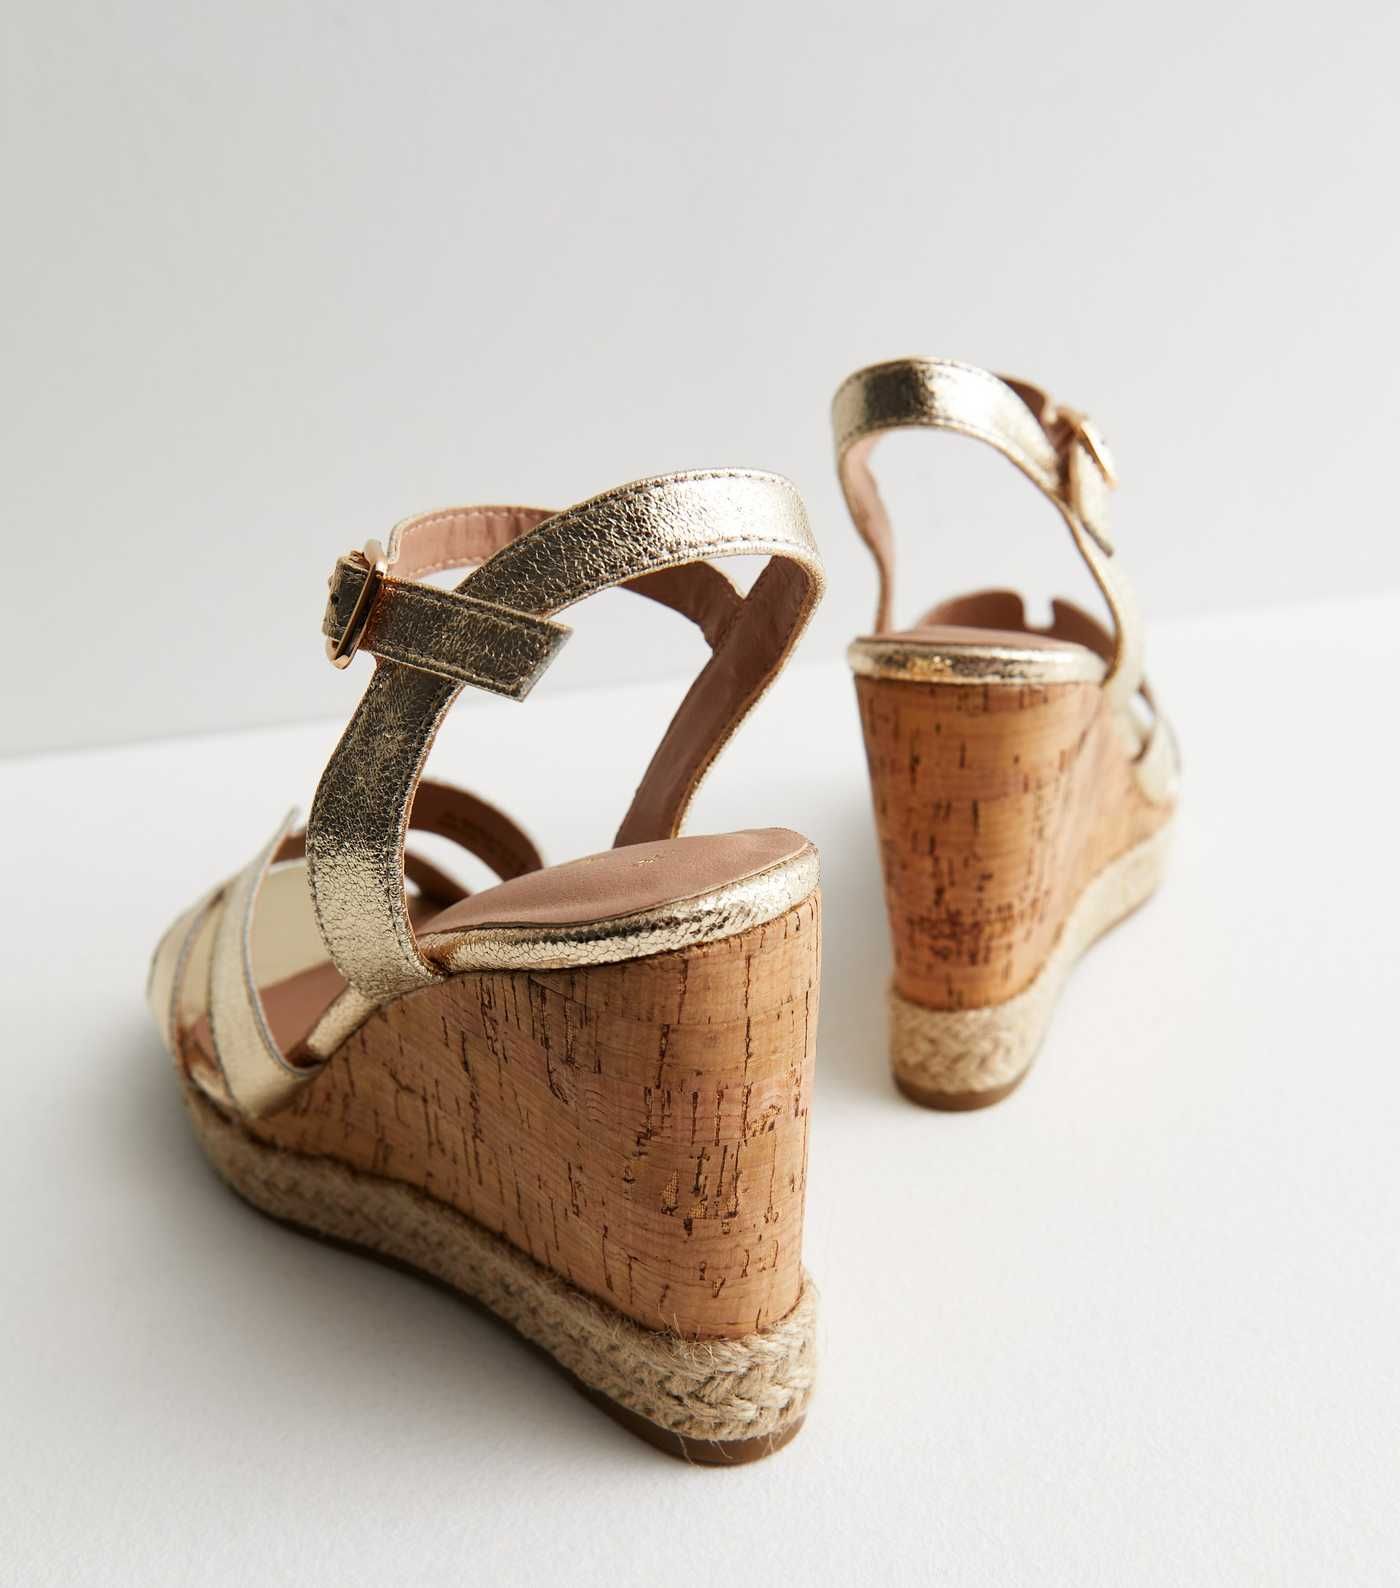 Gold Metallic Espadrille Trim Wedge Heel Sandals
						
						Add to Saved Items
						Remove fro... | New Look (UK)